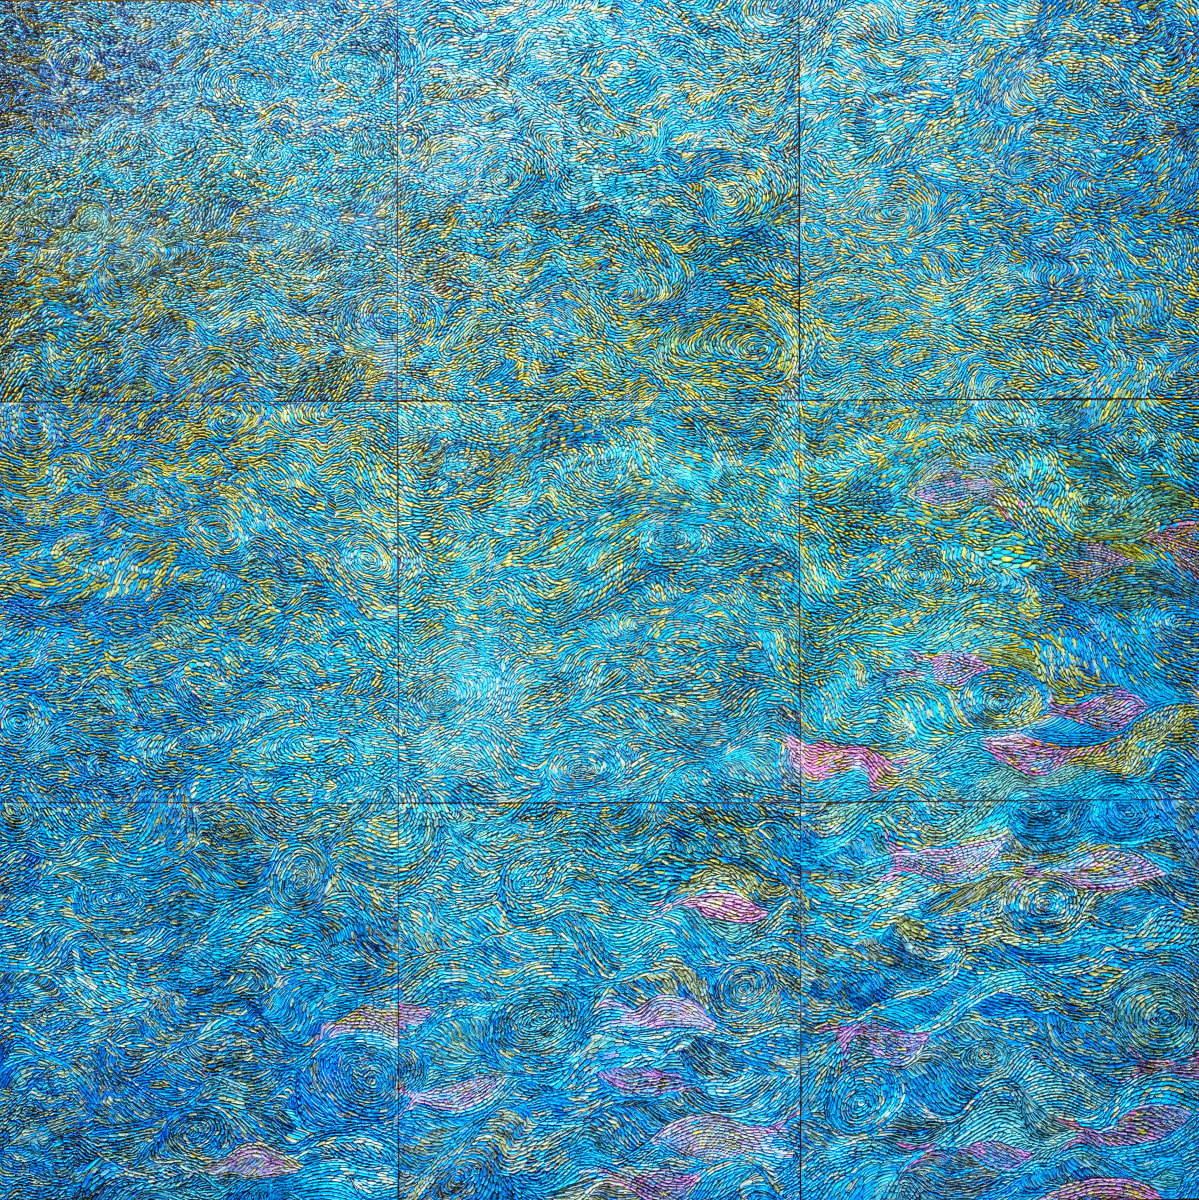 CURRENT by Michele LeMaitre  Image: This 9 FOOT X 9 FOOT X 1.5" intricate mosaic like work, titled "CURRENT" depicts Ocean water, with several fish swimming within the flowing water and is a metaphor for resilience, self reflection, the shifting one's own perspective, and opening up to all things possible. 

This is a NEWLY INVENTED process and style of Mixed Media, with bold colors that change with the movement of your body.